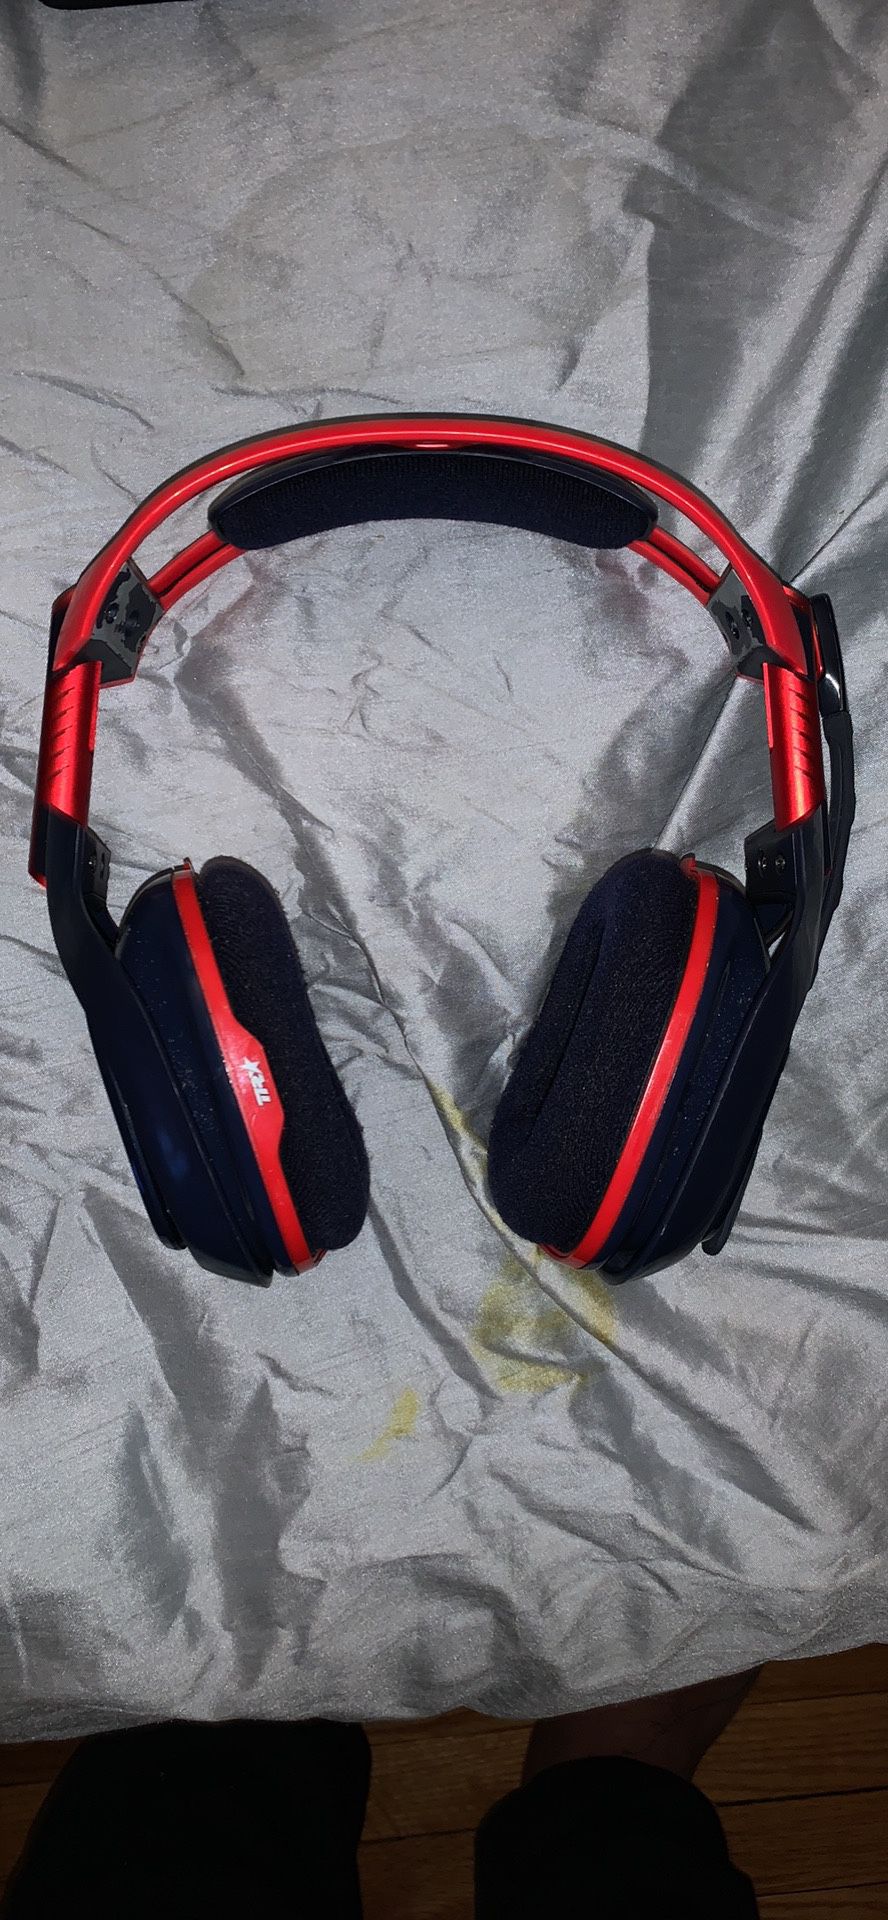 Astro gaming headset and mix amp included